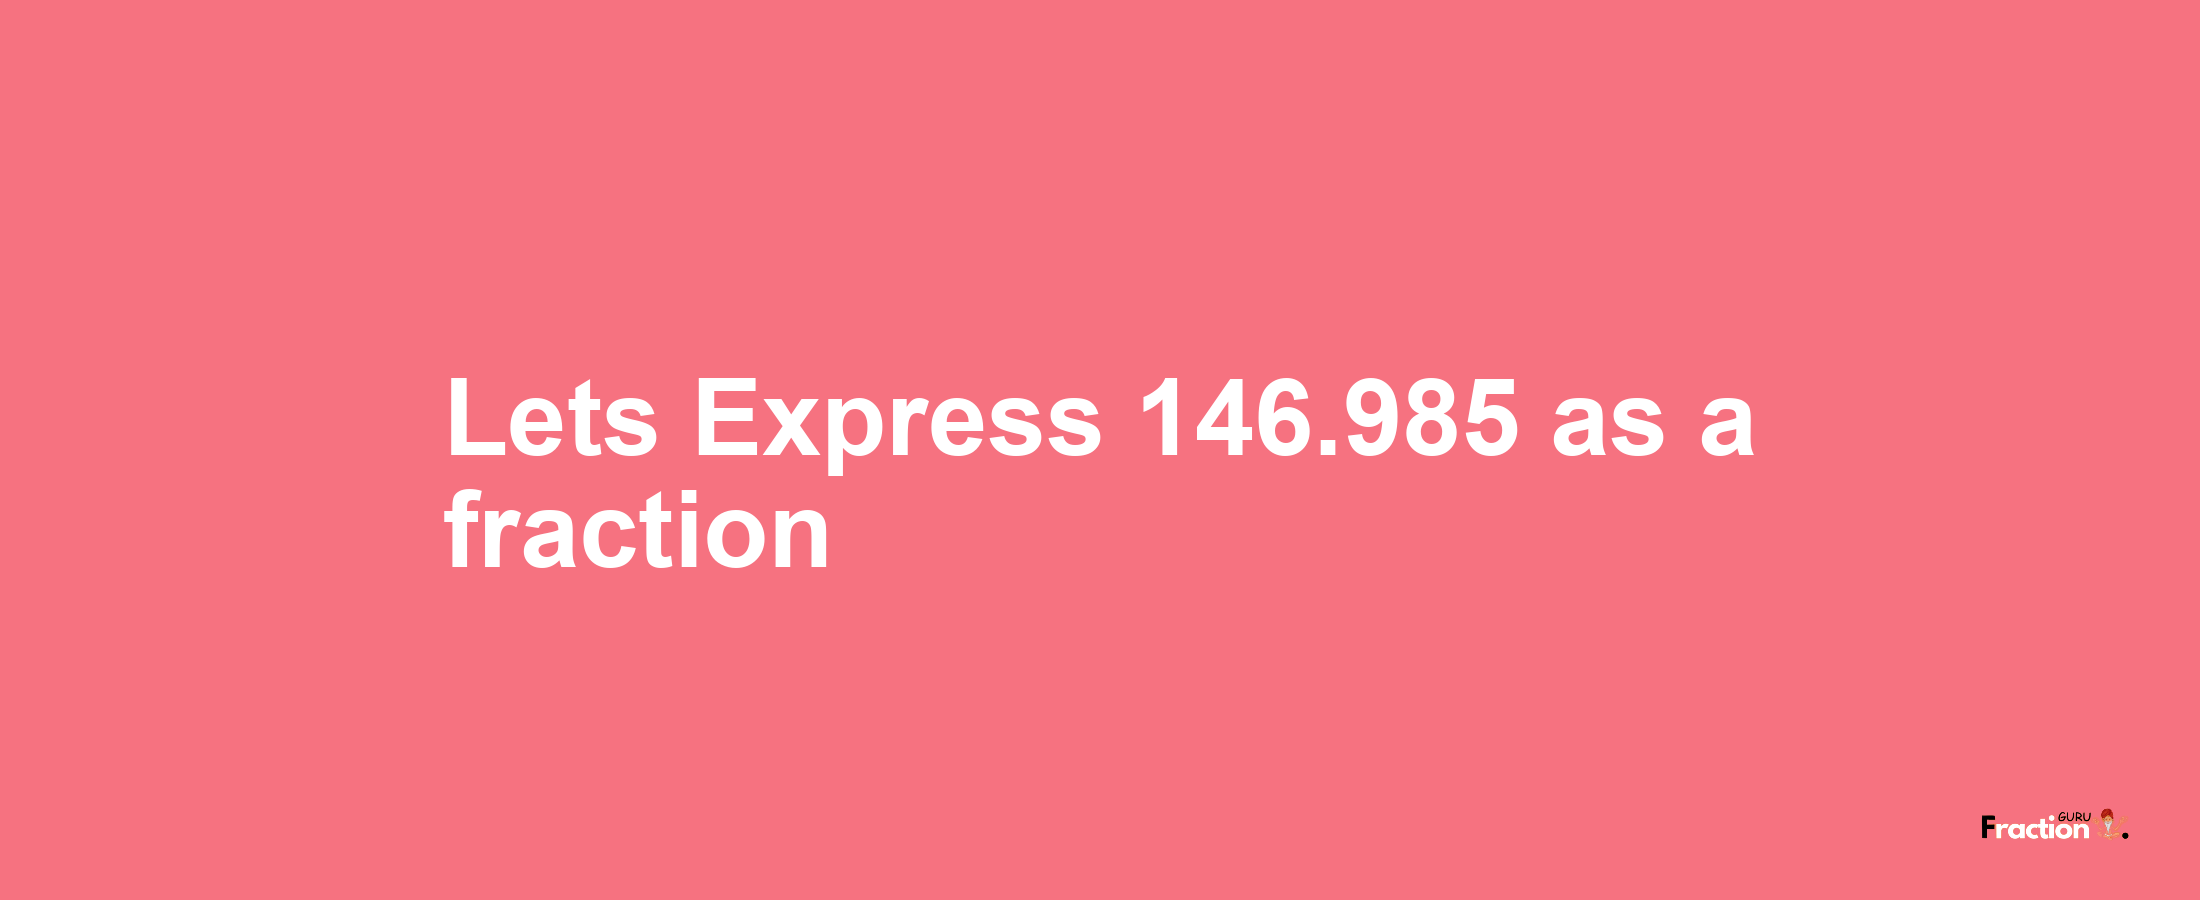 Lets Express 146.985 as afraction